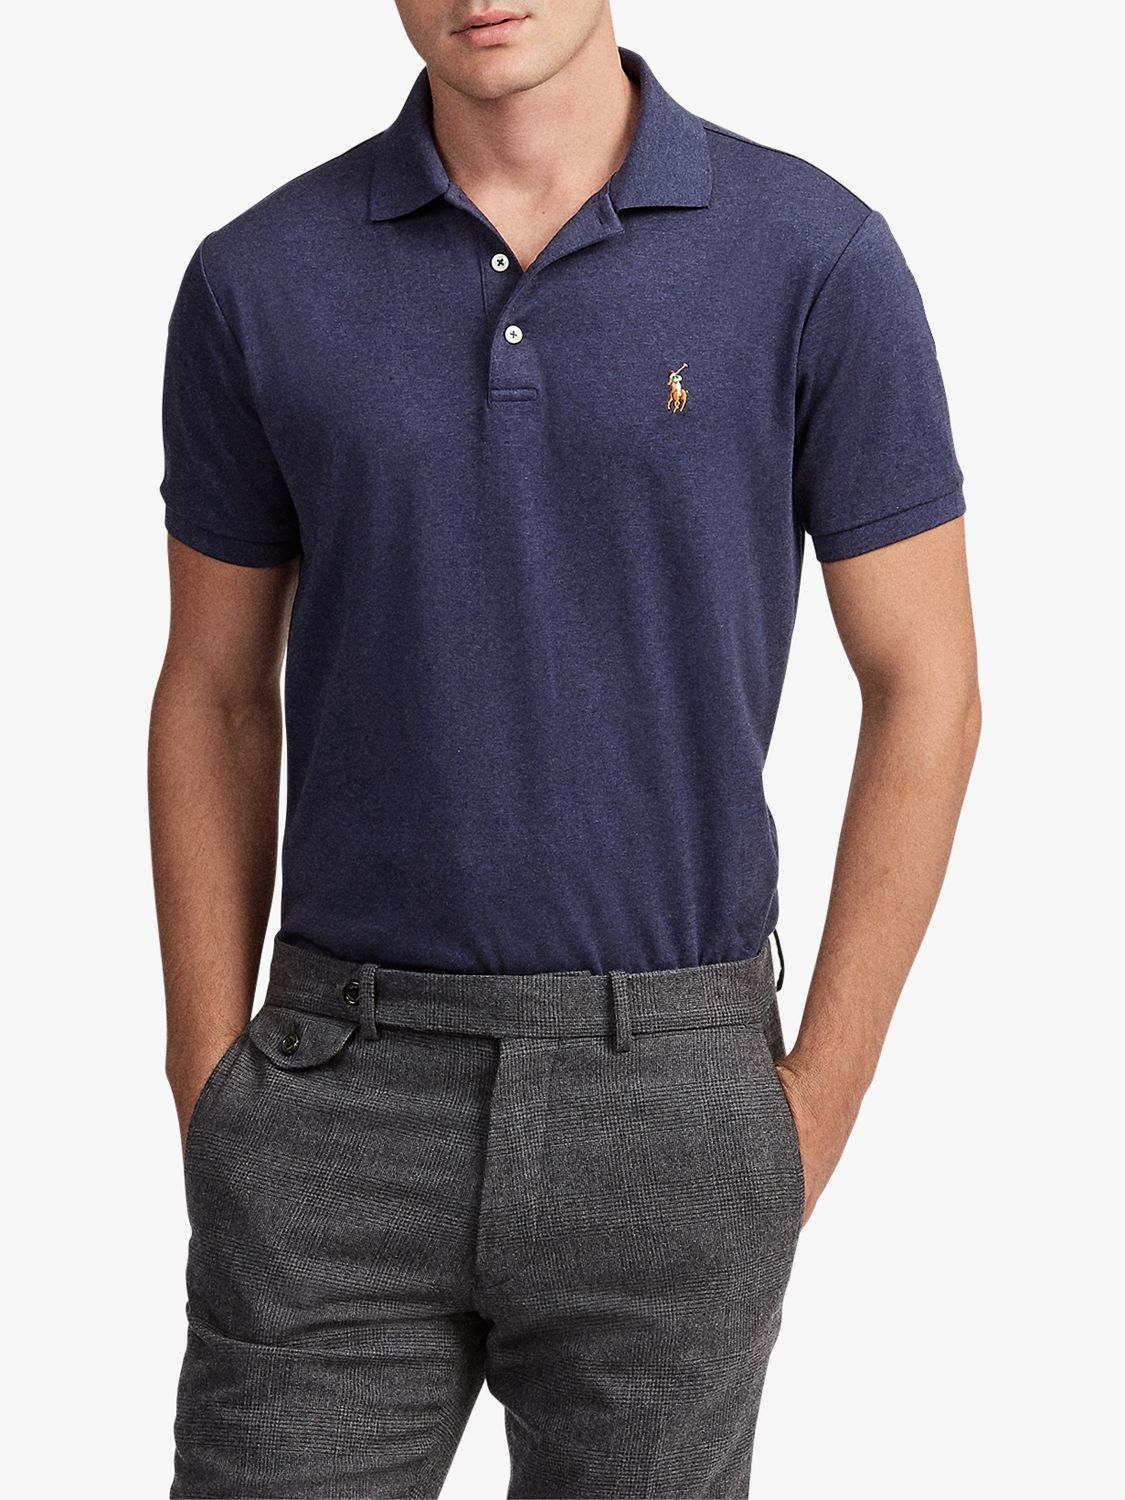 Polo Ralph Lauren Slim Fit Soft Touch Polo Shirt, Spring Navy Heather ...